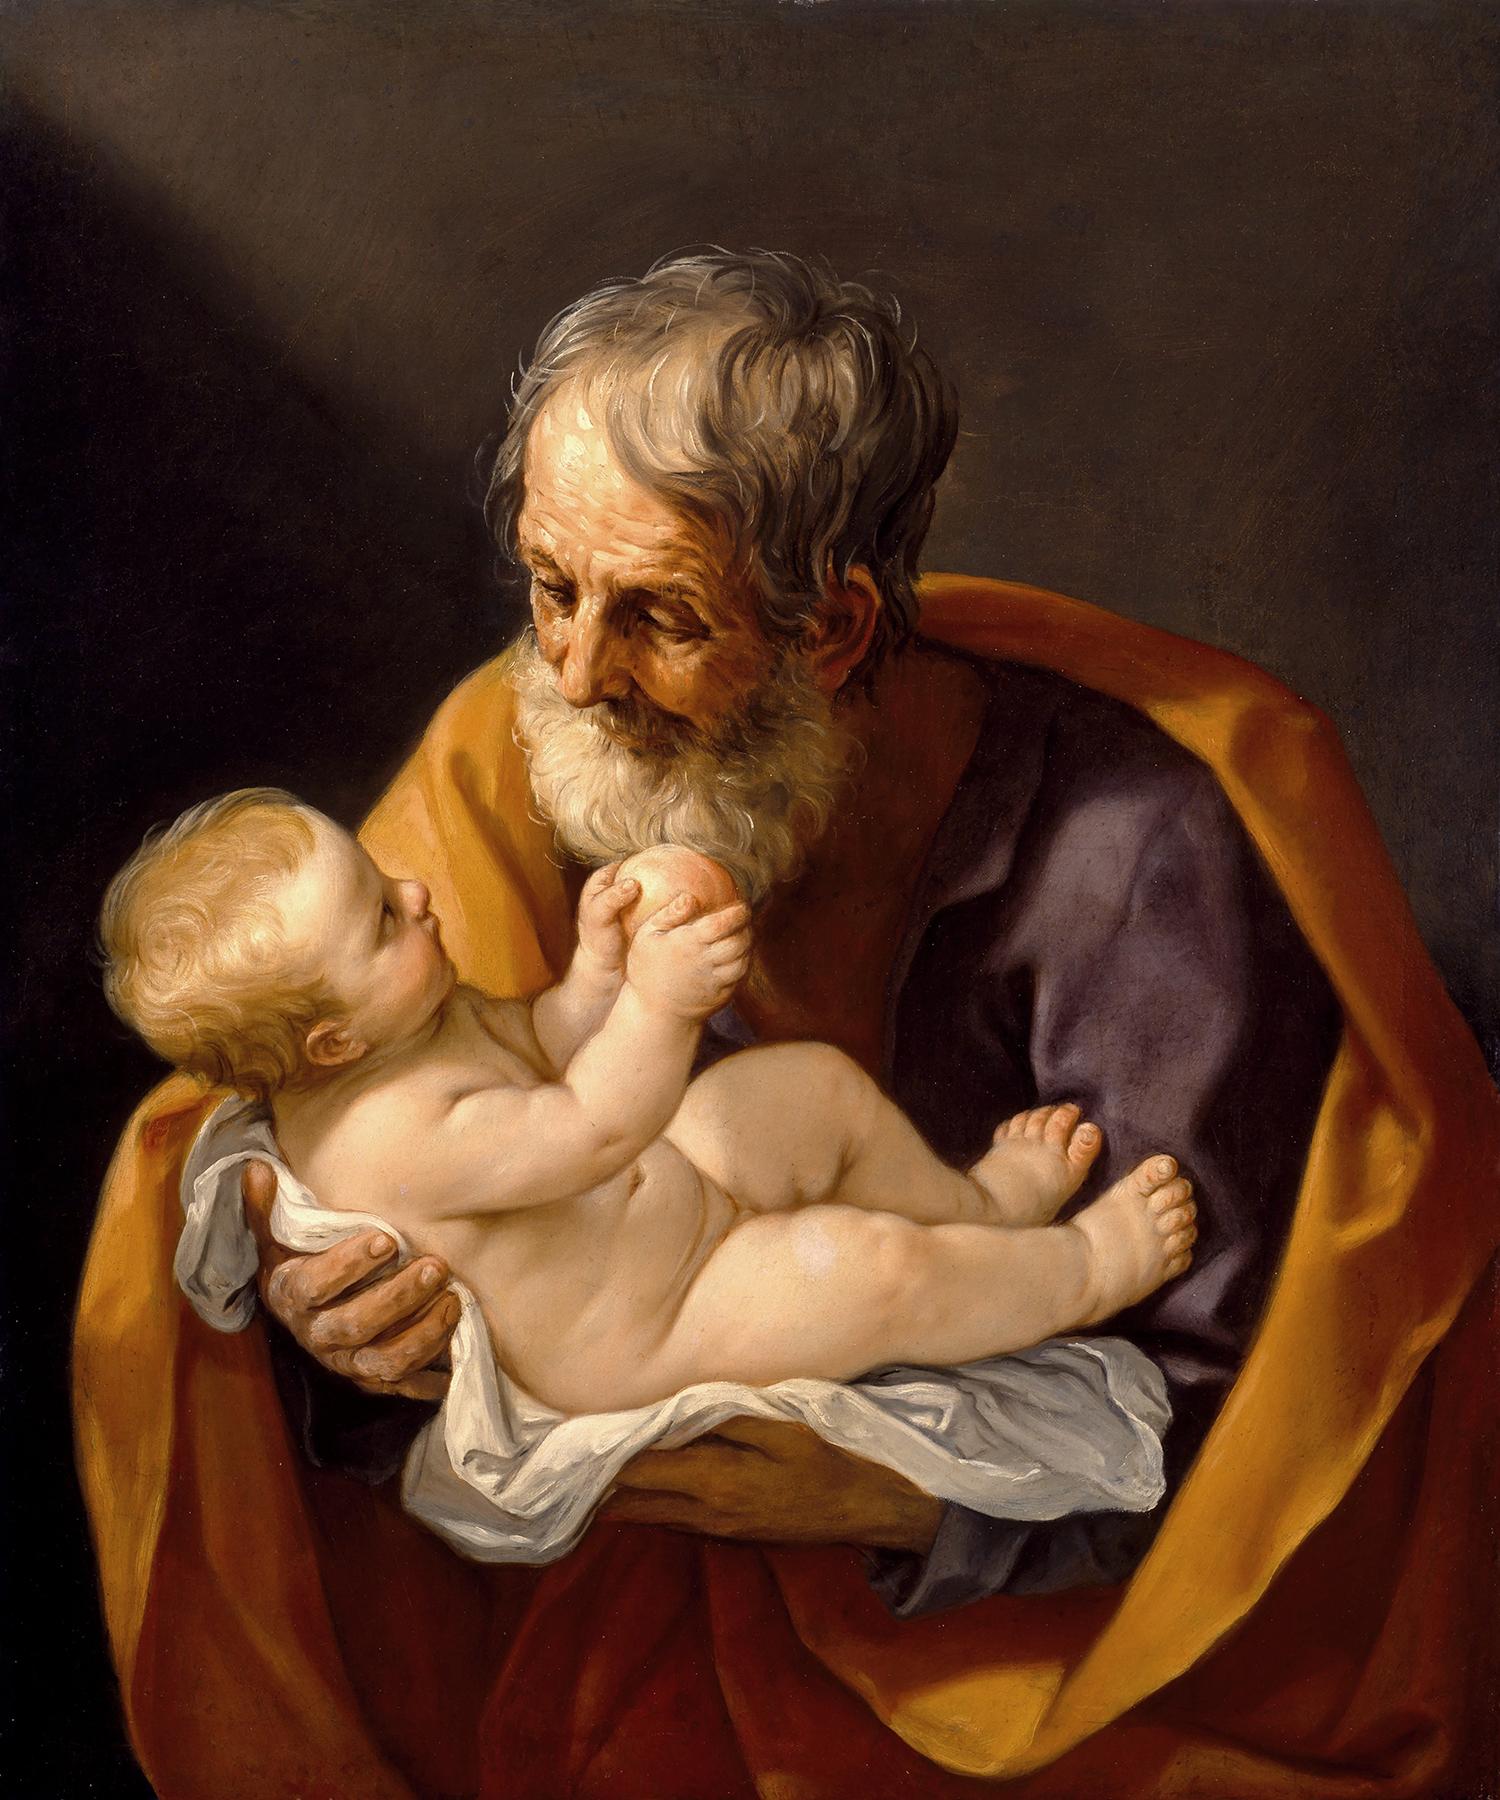 GUIDO RENI – SAINT JOSEPH & THE CHRIST CHILD – 1640 OIL ON CANVAS - Reproduction - Painting by Kaid Cota